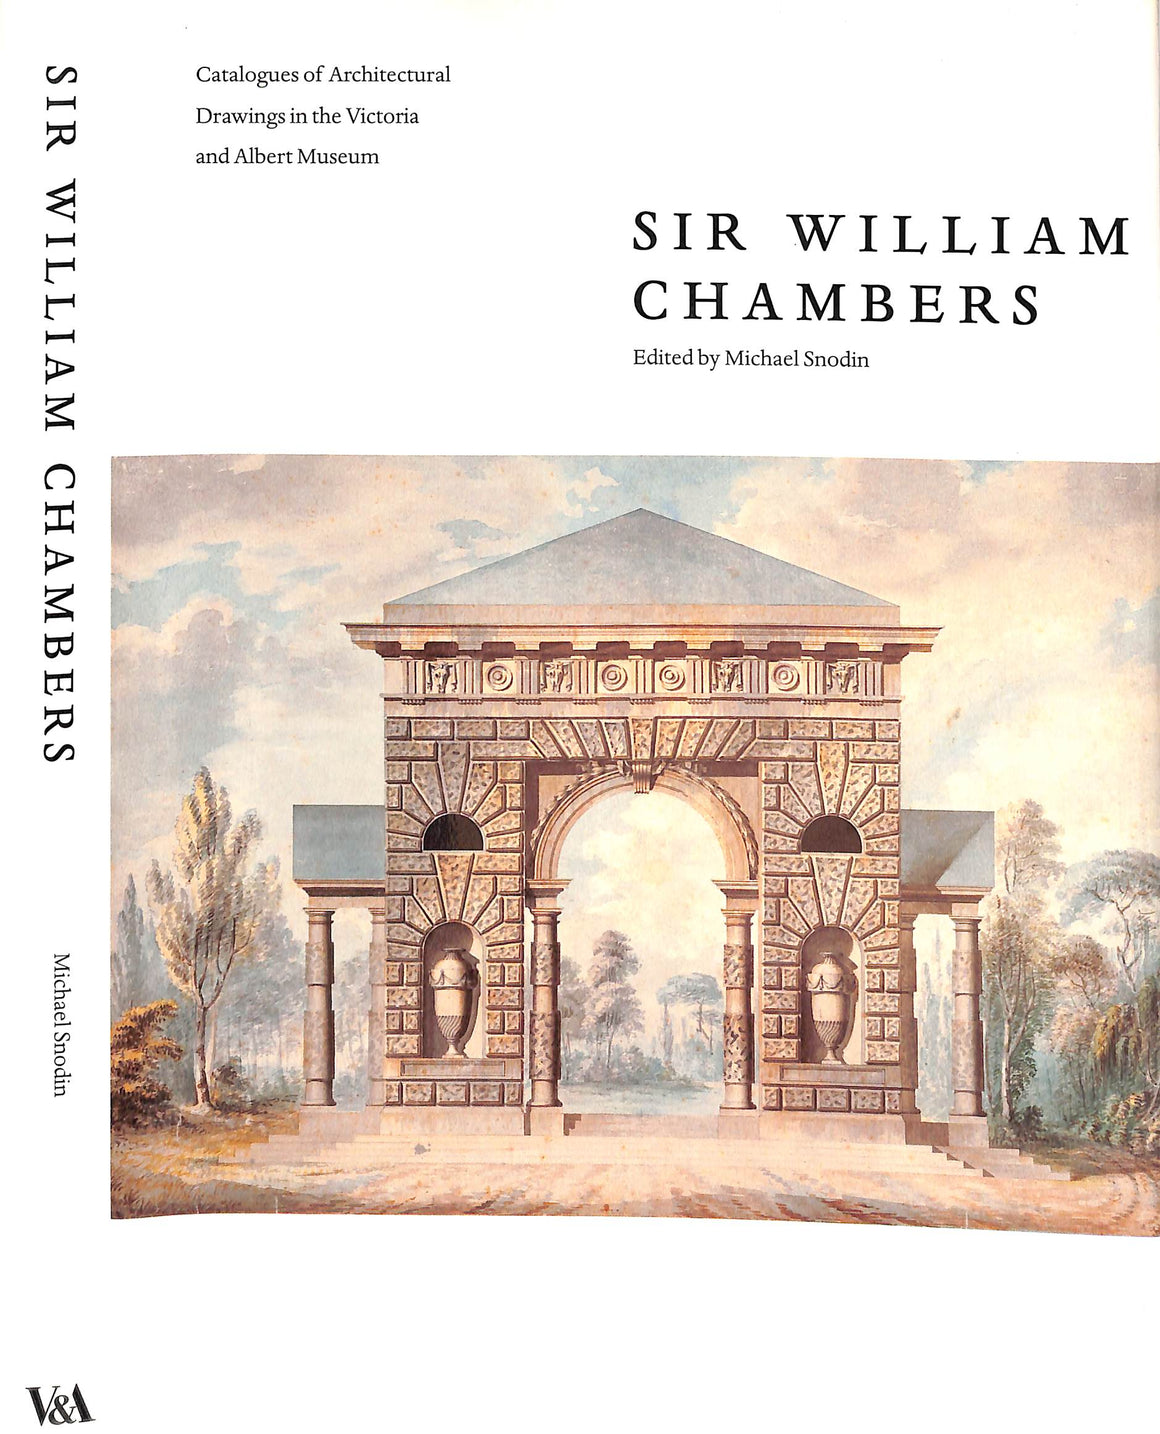 "Sir William Chambers" 1996 SNODIN, Michael [edited by]